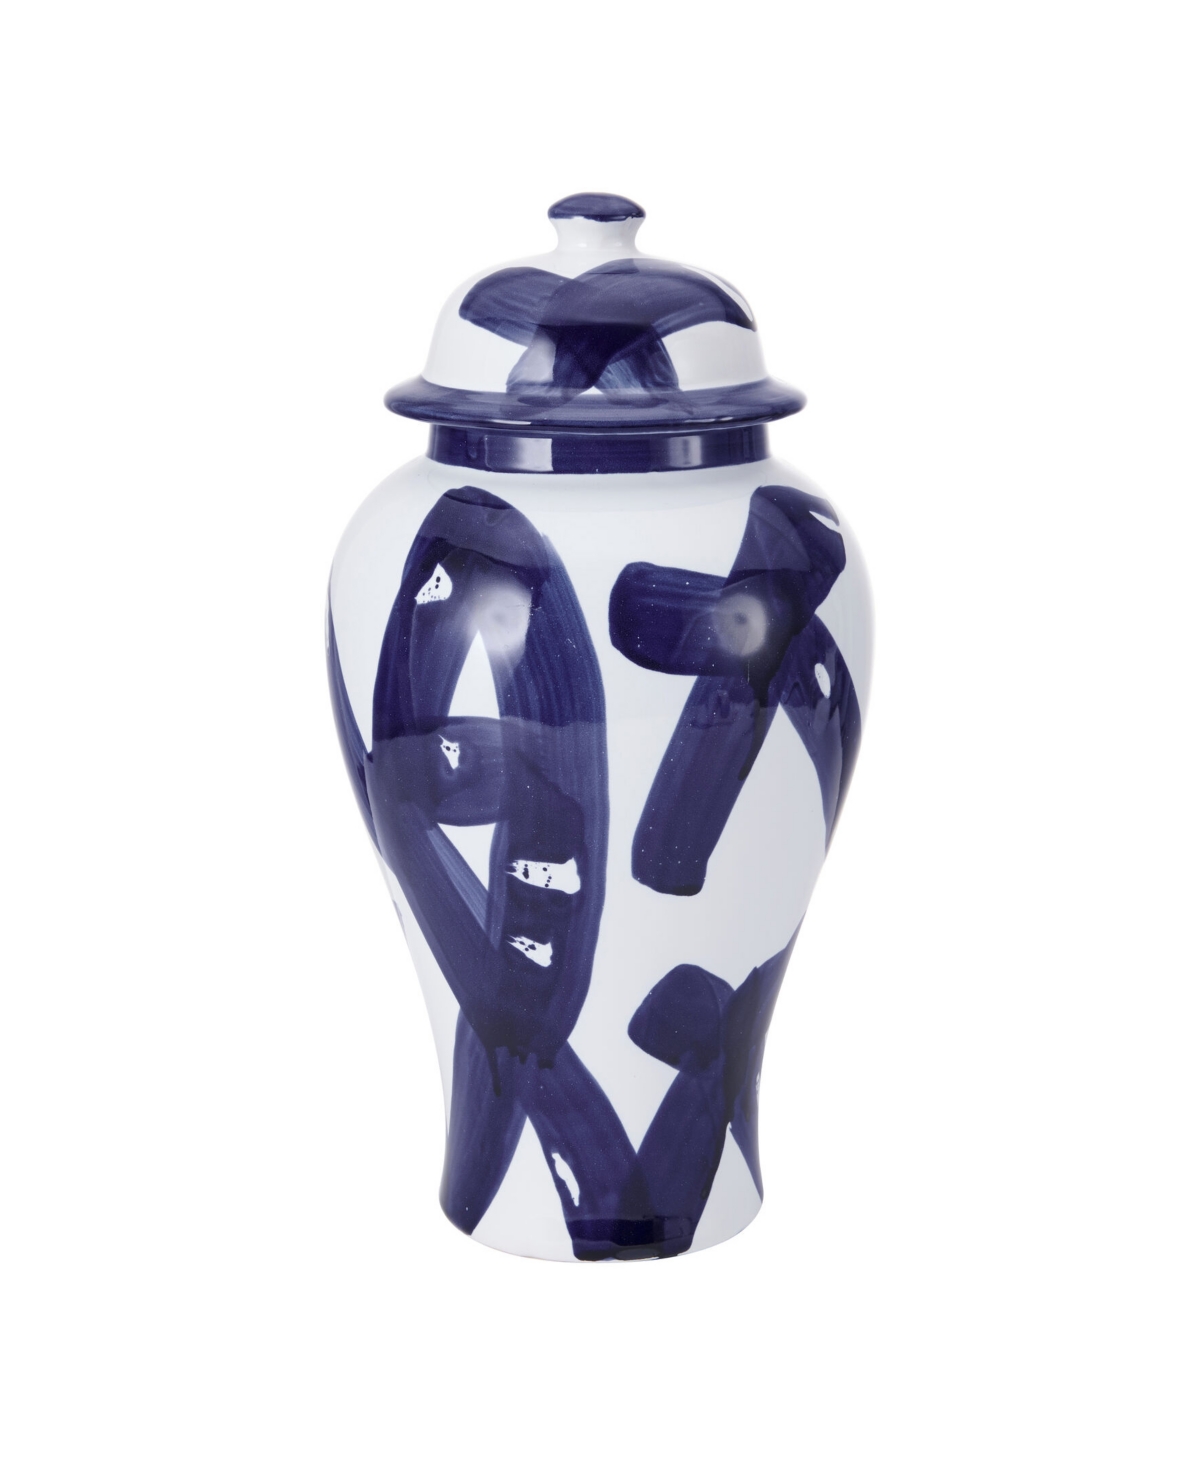 Mikasa Paint Strokes Ceramic Canister With Lid In Multi Color